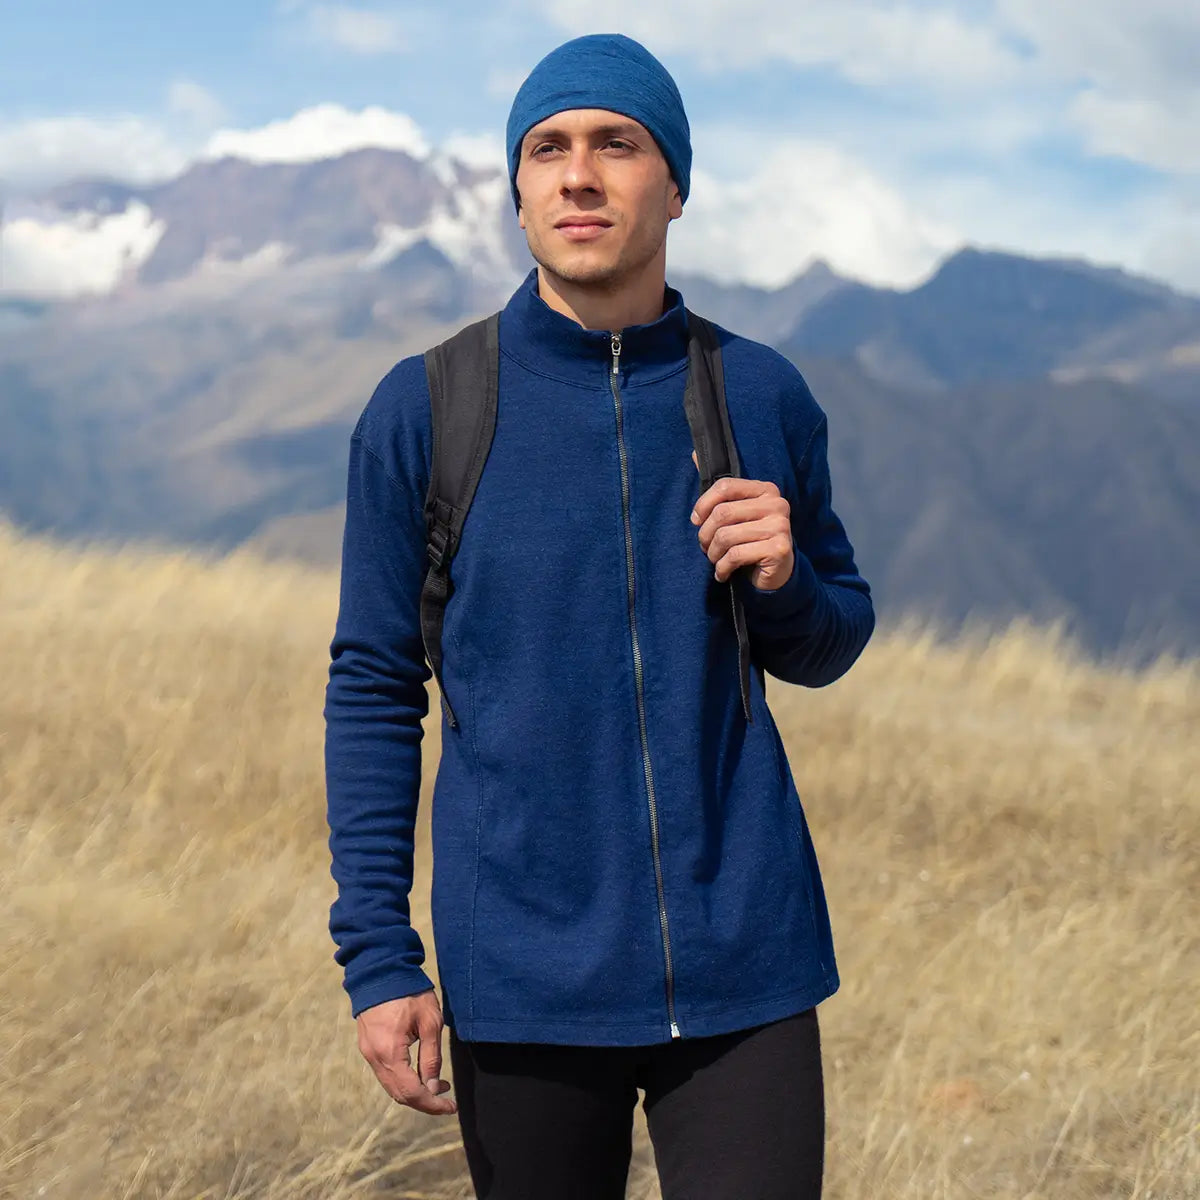 Man wearing alpaca wool mid layer on a hike in the mountains